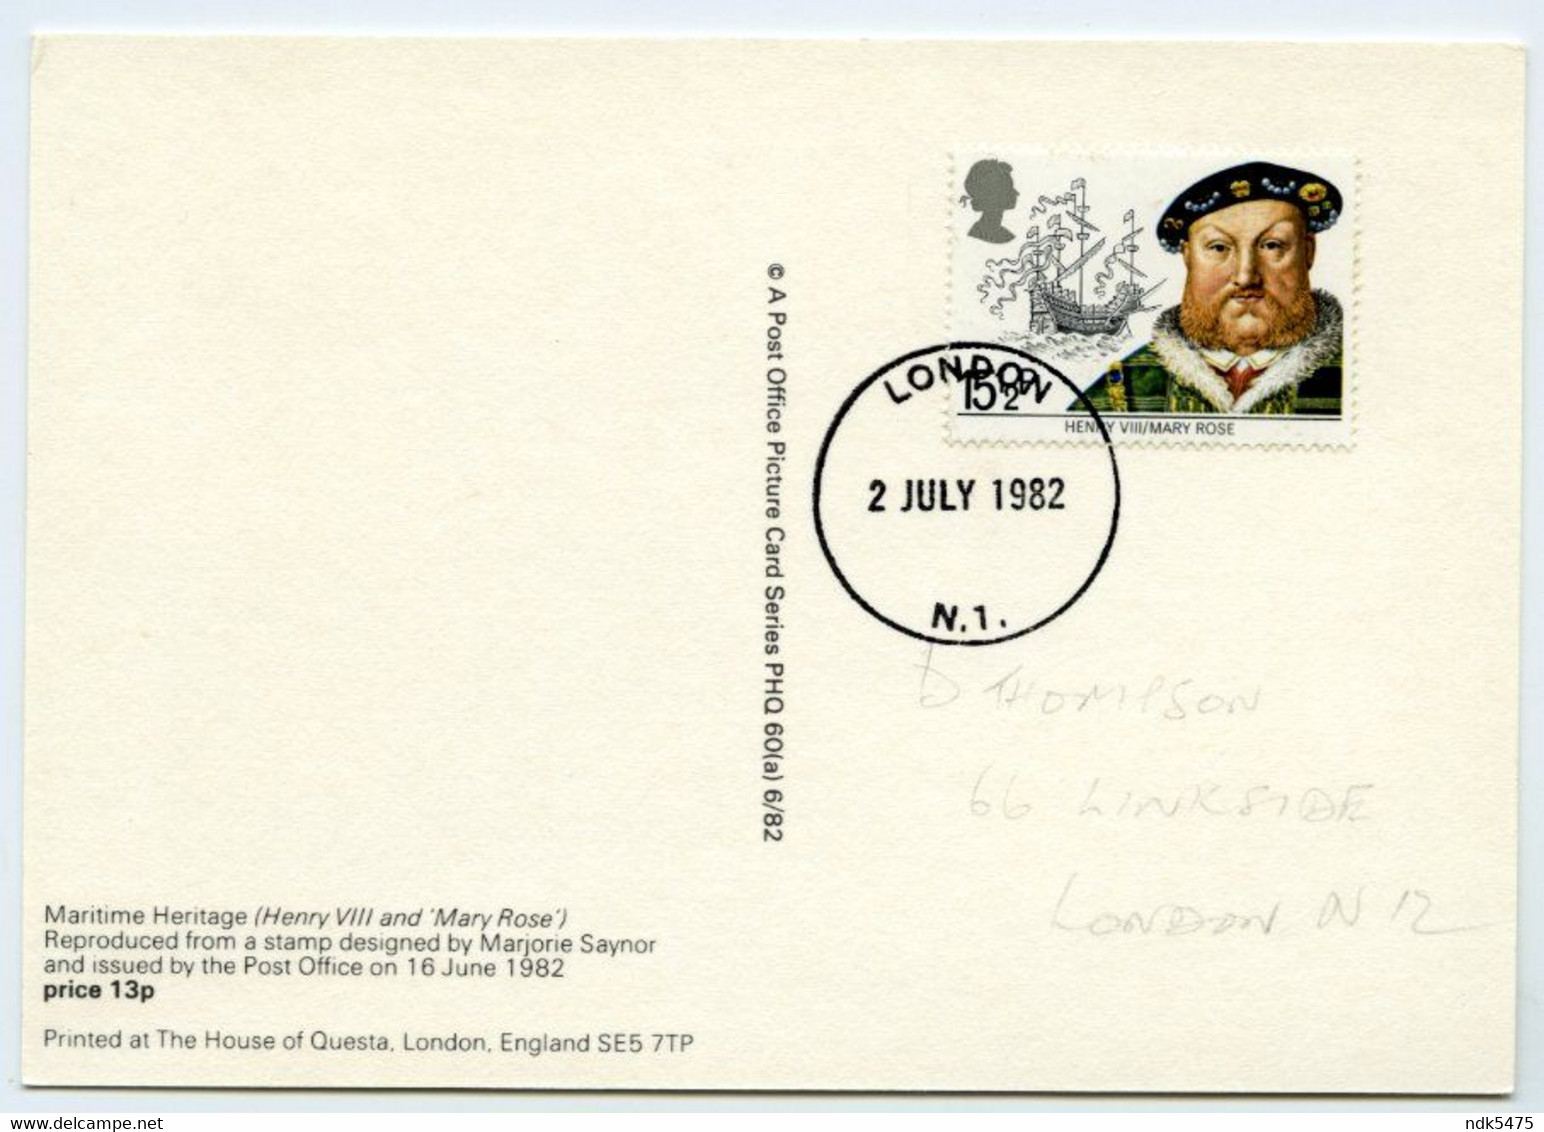 PHQ : MARITIME HERITAGE - HENRY VIII, MARY ROSE, 1982 : FIRST DAY OF ISSUE, LONDON N1 (10 X 15cms Approx.) - PHQ Karten